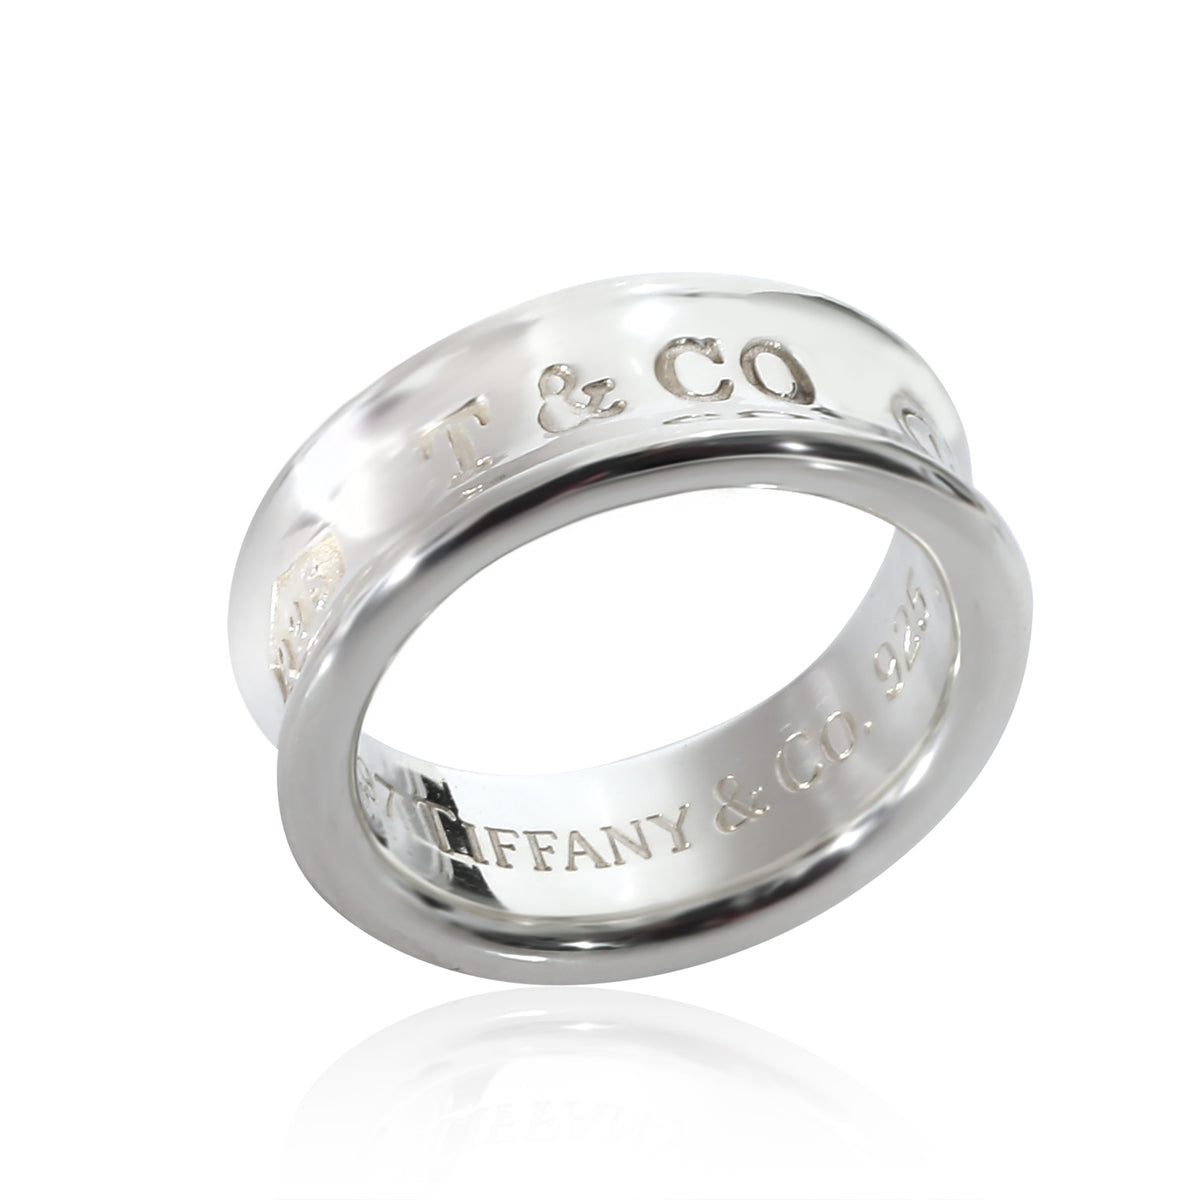 Tiffany & Co. 1837 Band in Sterling Silver